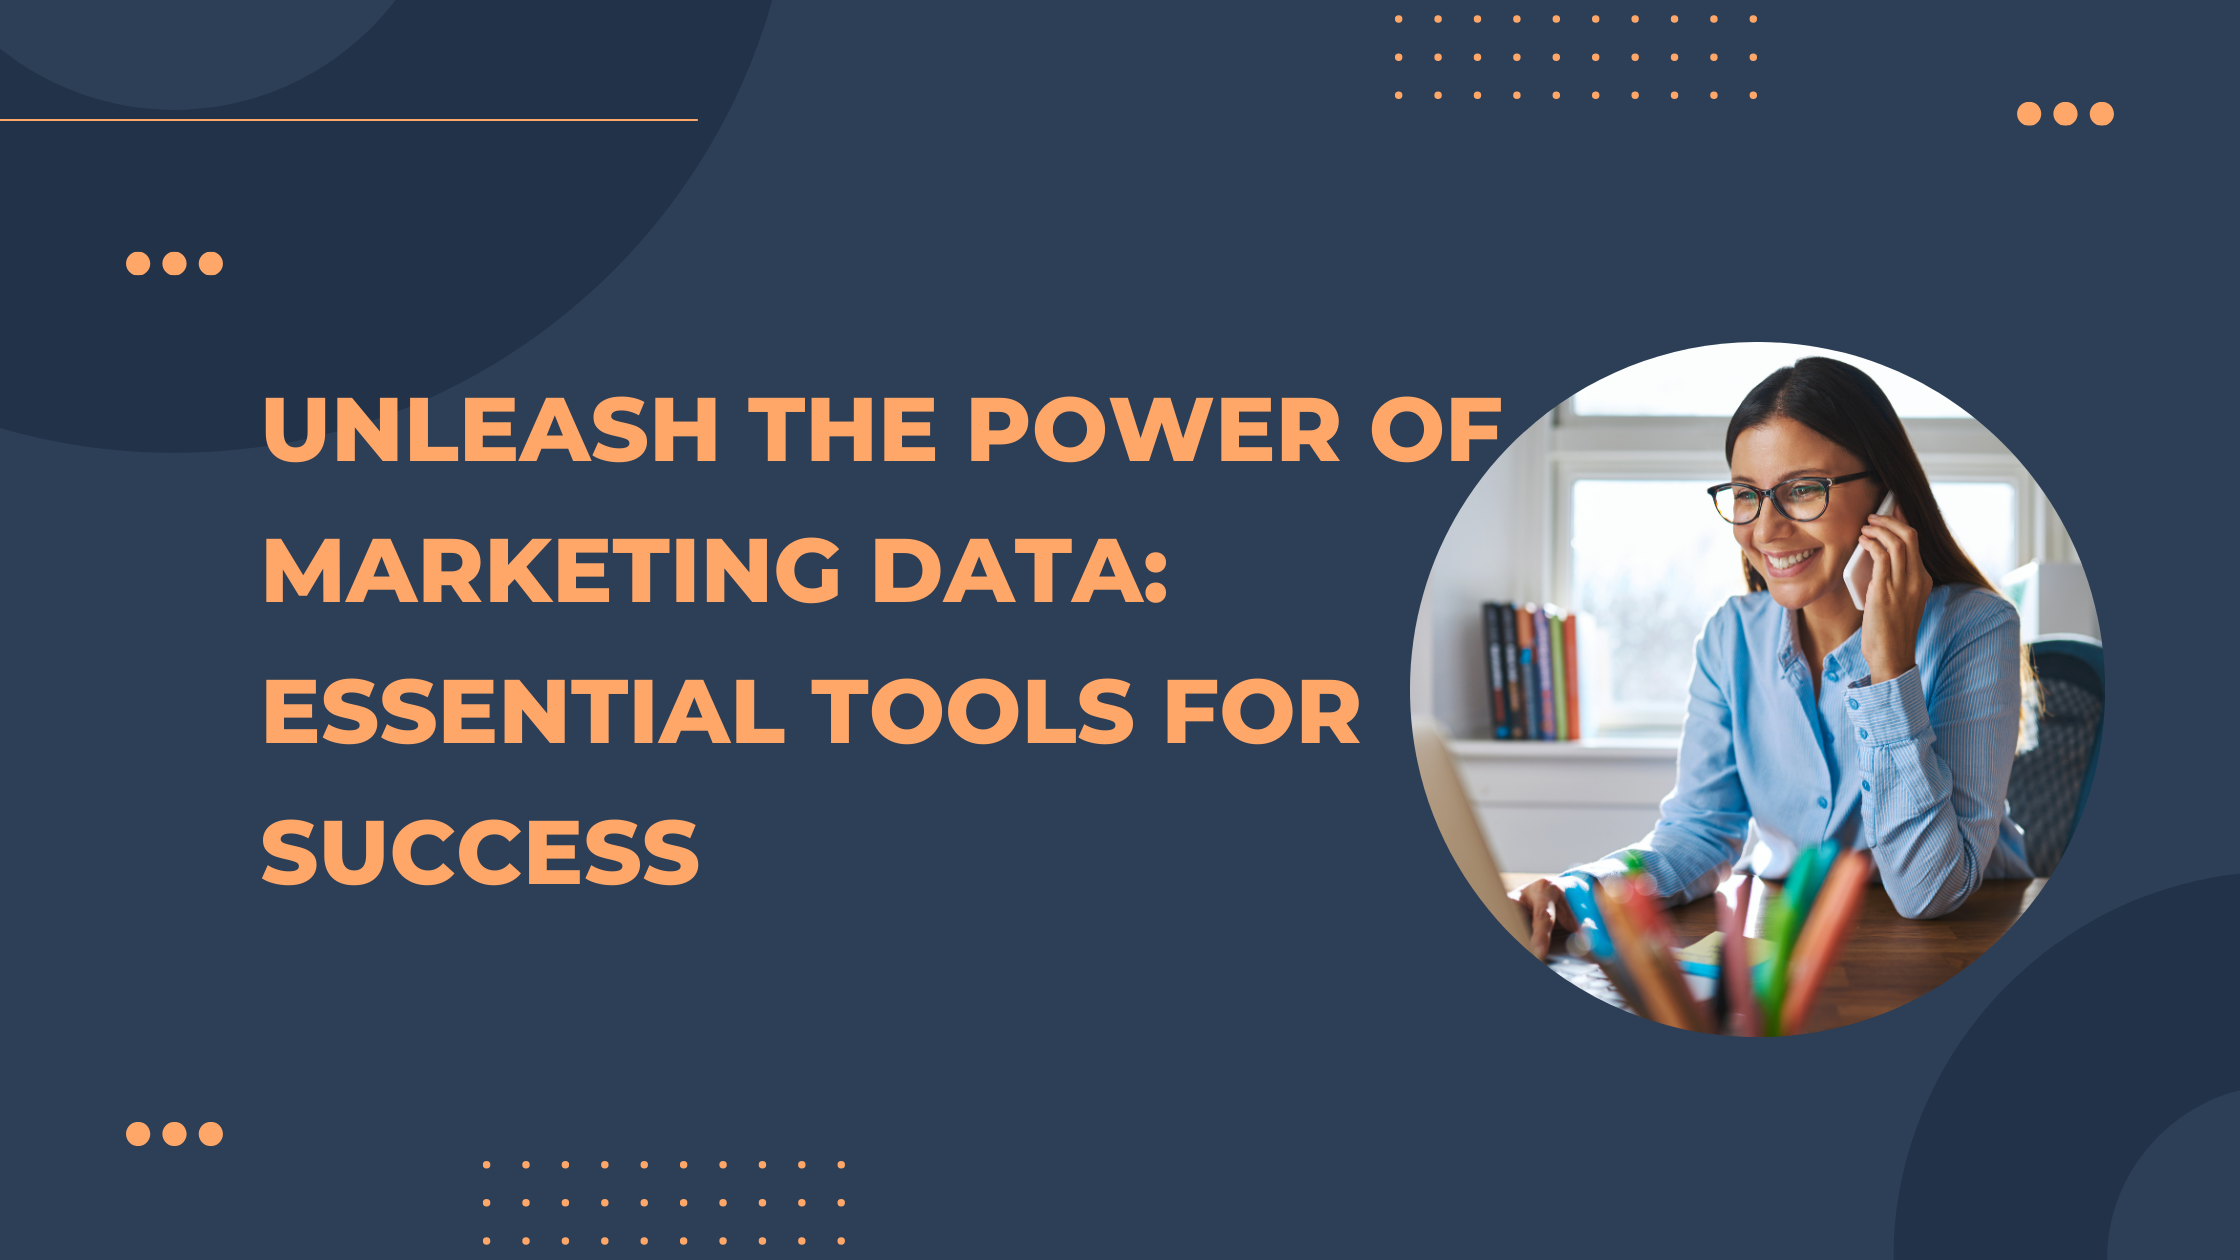 Unleash the Power of Marketing Data: Essential Tools for Success